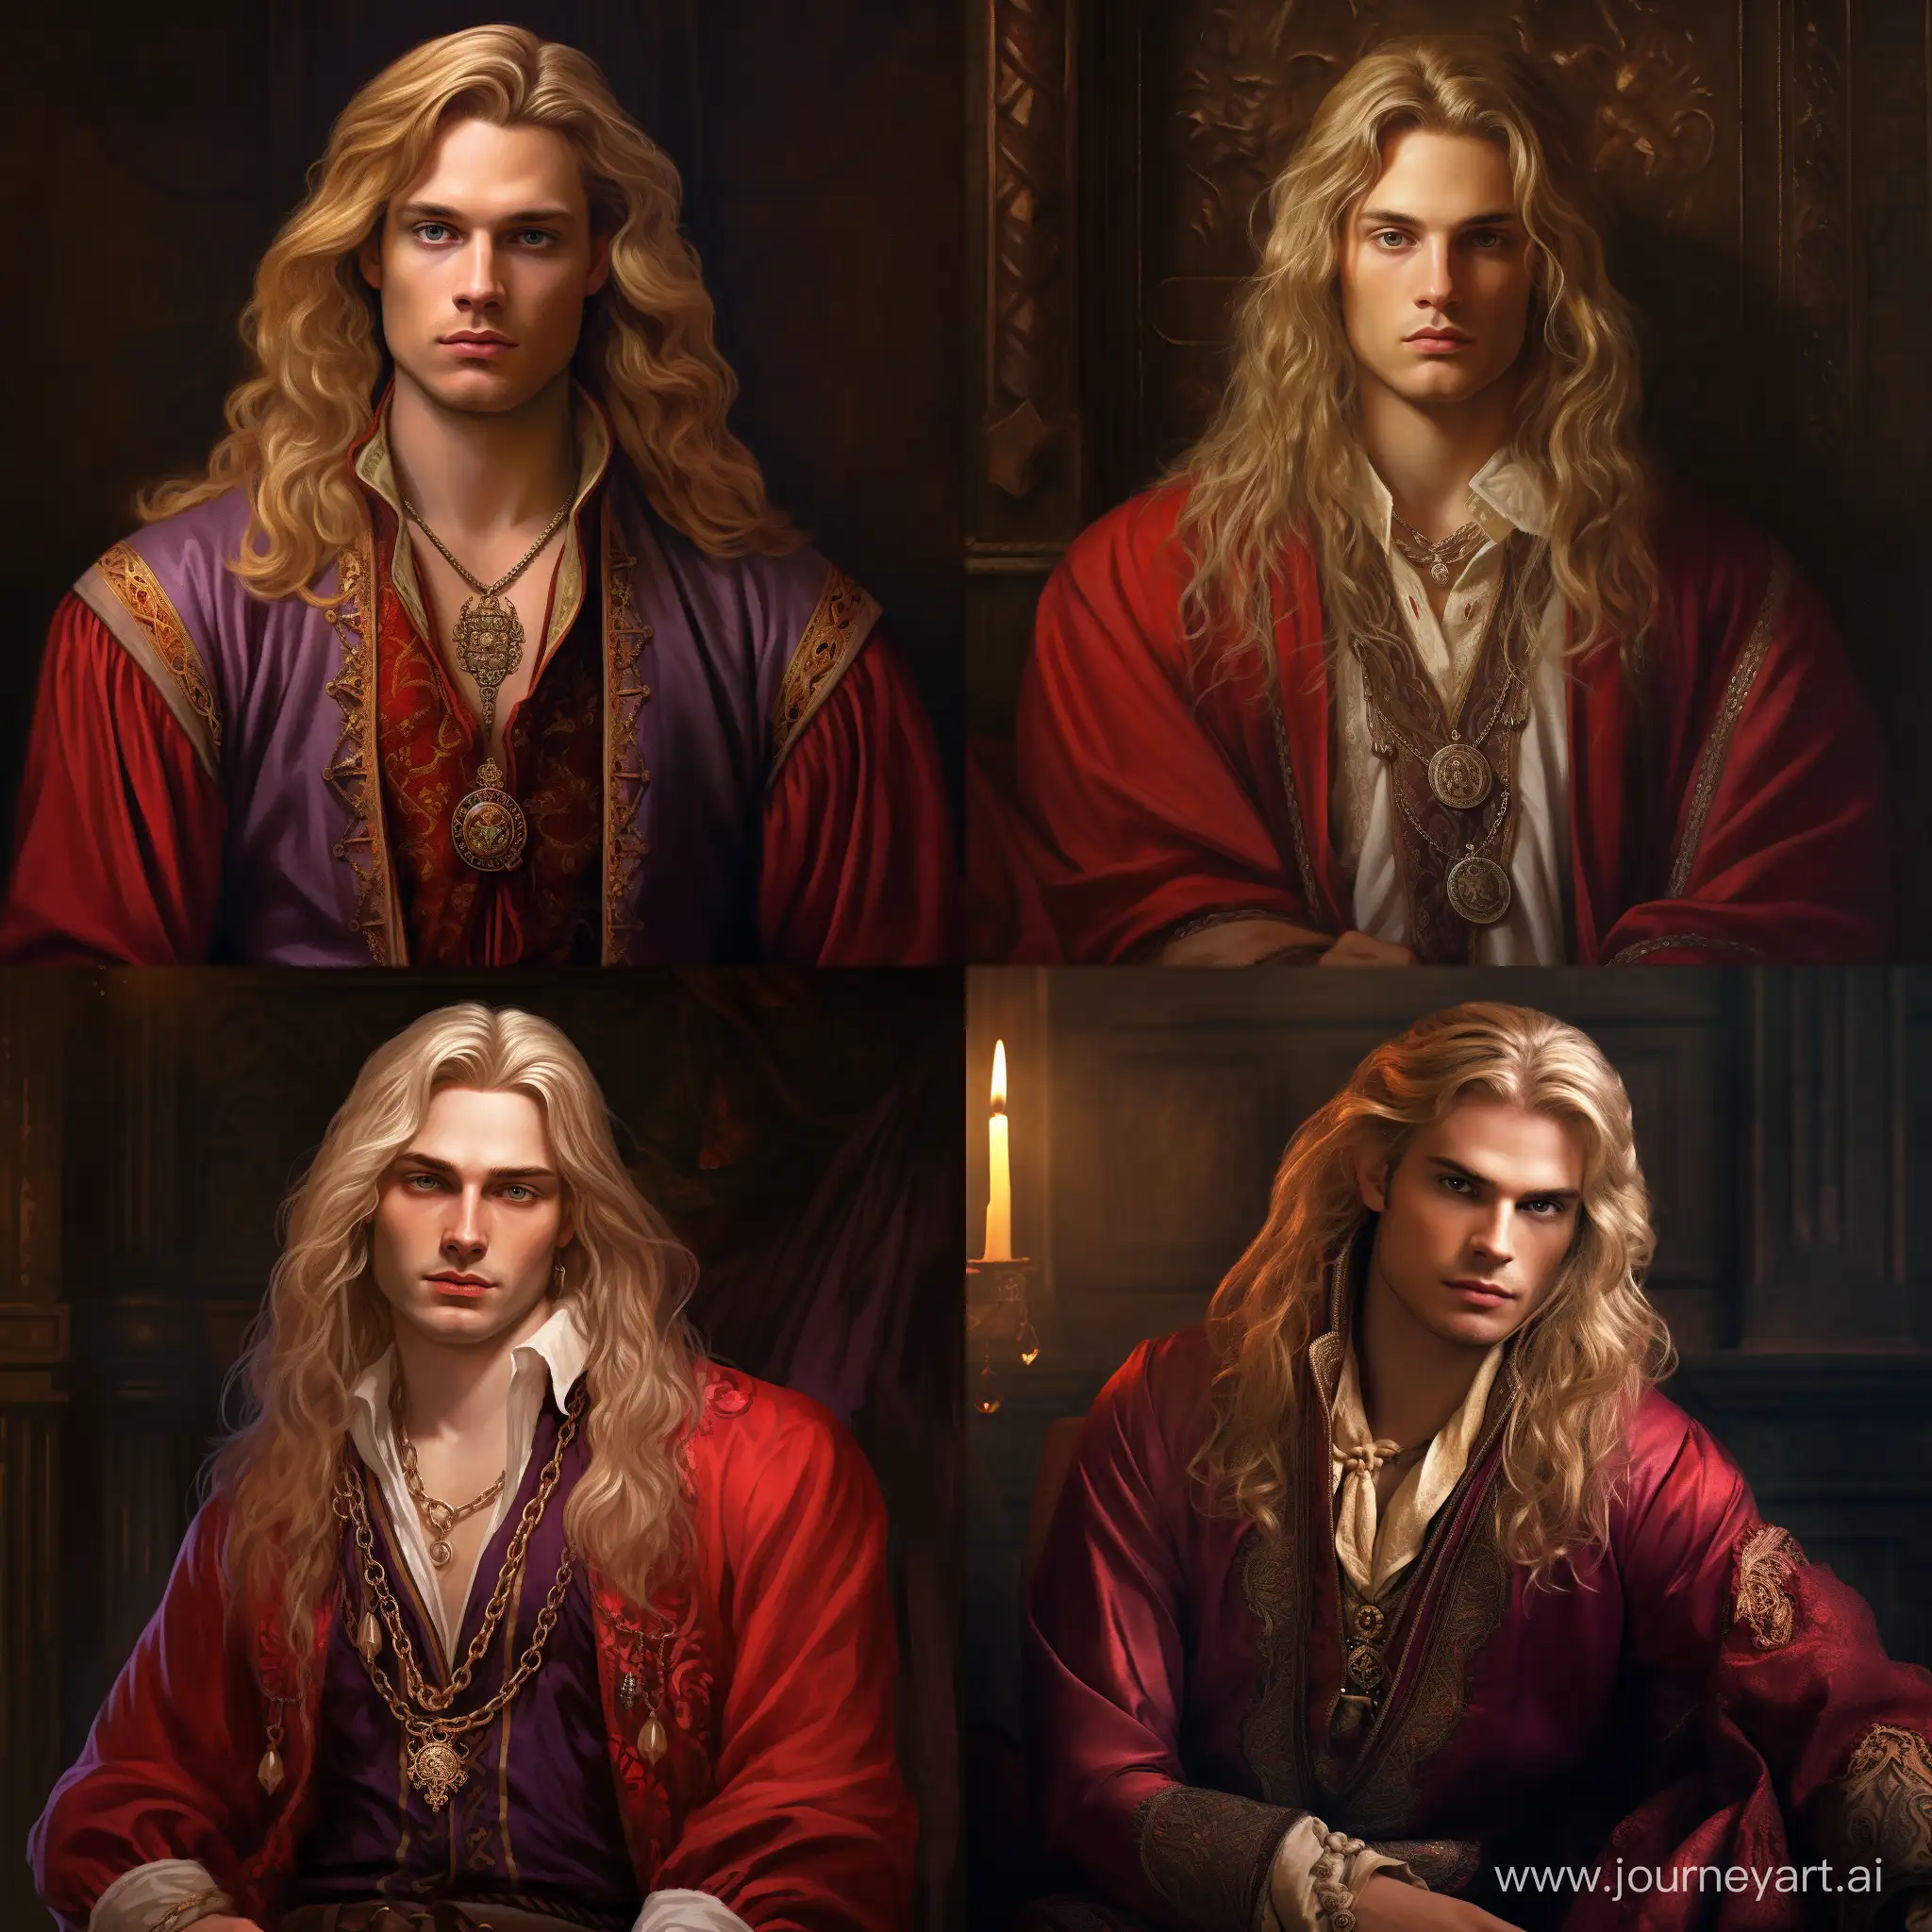 Rich-Male-Mage-in-Red-Clothes-and-Jewels-Medieval-Portrait